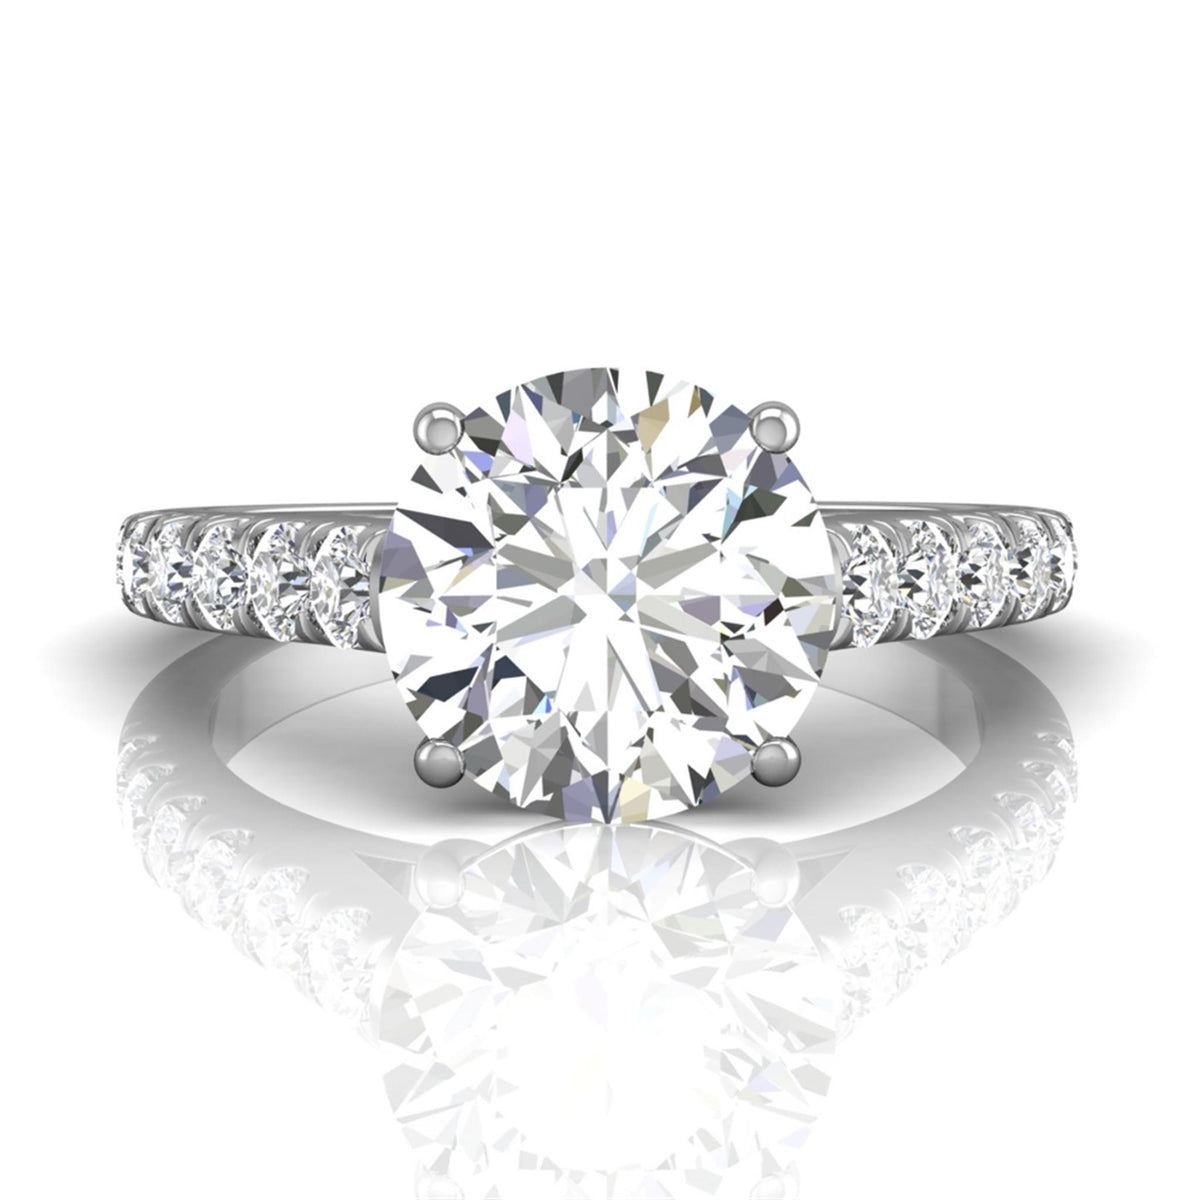 14Kt White Gold Classic Prong Engagement Ring Mounting With 0.69cttw Natural Diamonds